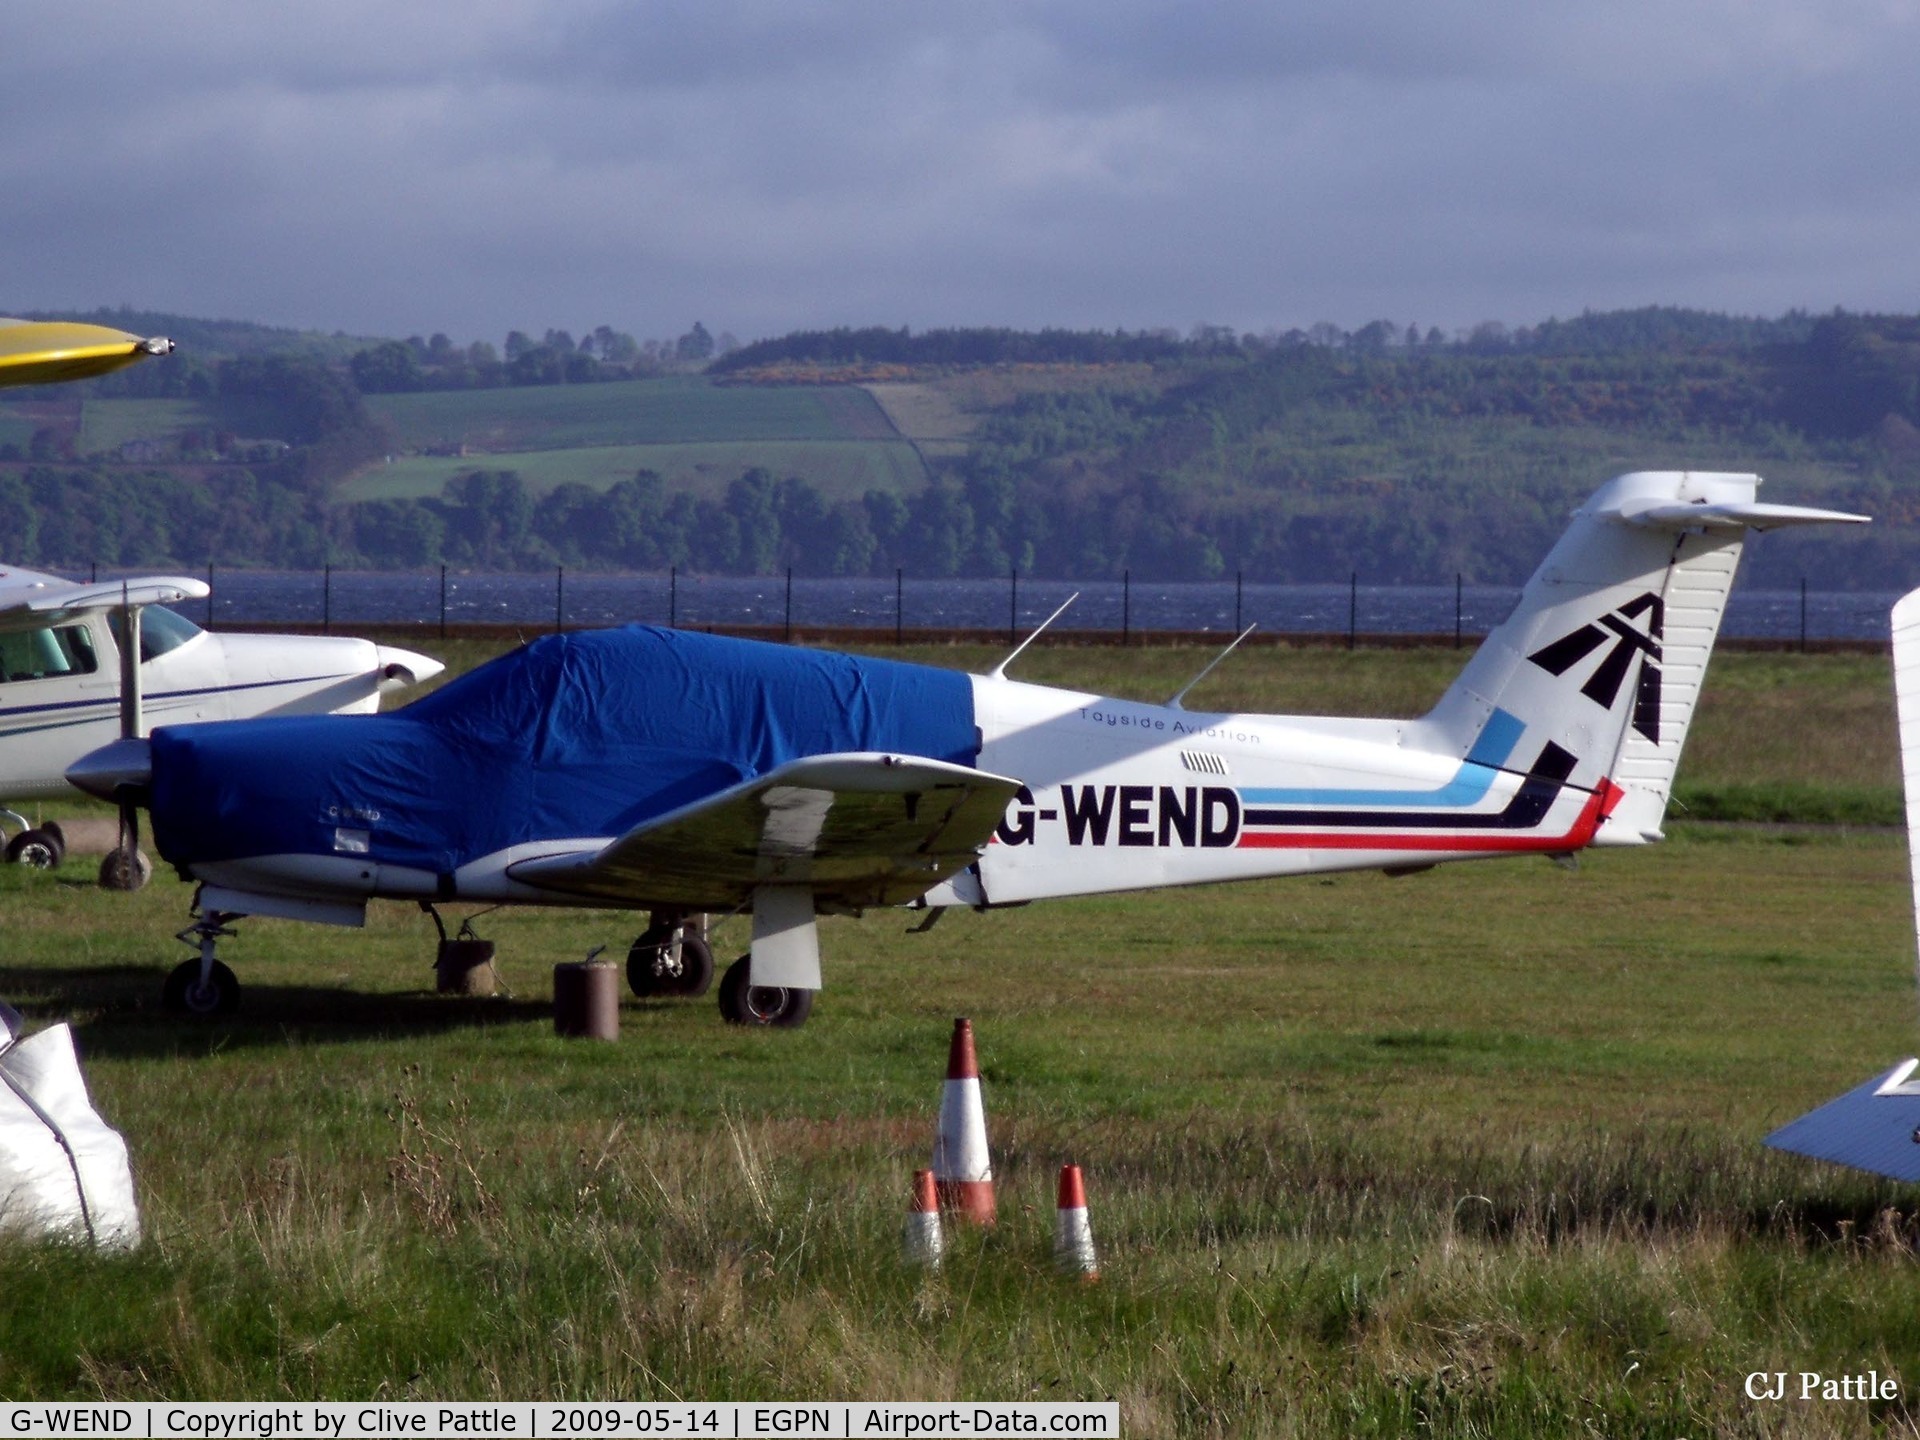 G-WEND, 1981 Piper PA-28RT-201 Arrow IV C/N 28R-8118026, Wearing her pyjama top - G-WEND of Tayside Aviation at Dundee Riverside EGPN in May 2009